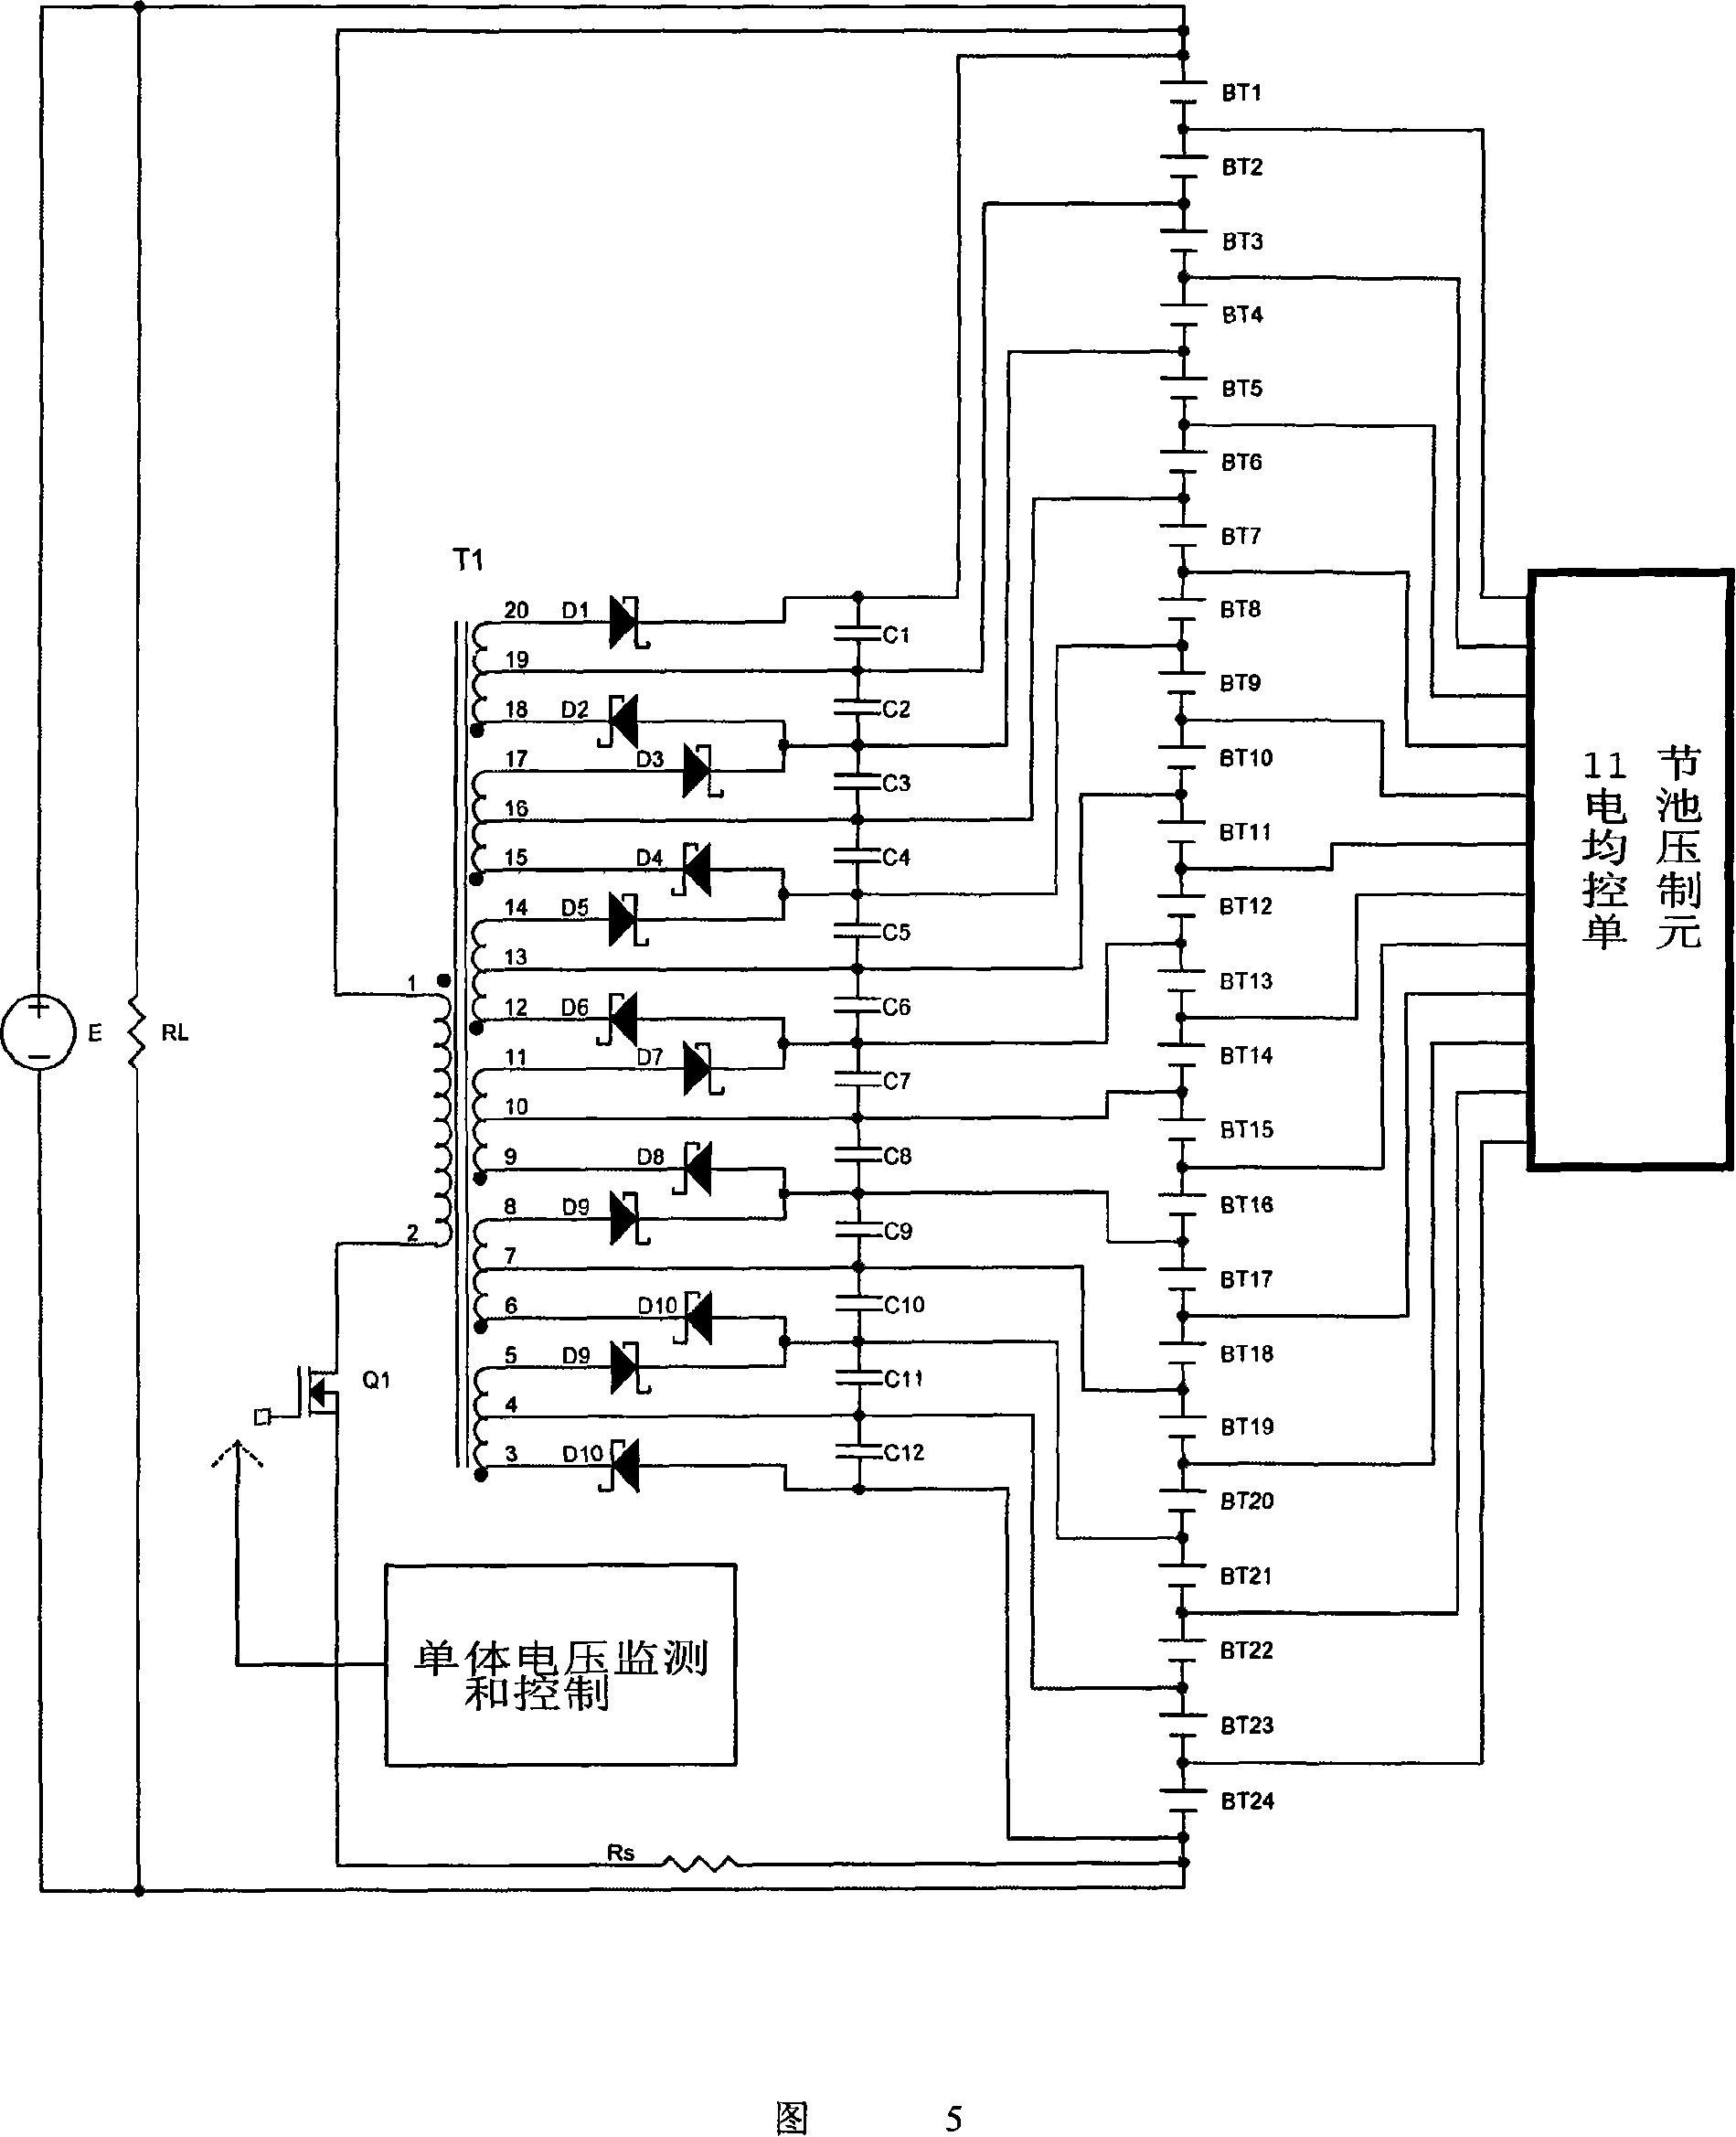 Equalizer circuit for backup power supply